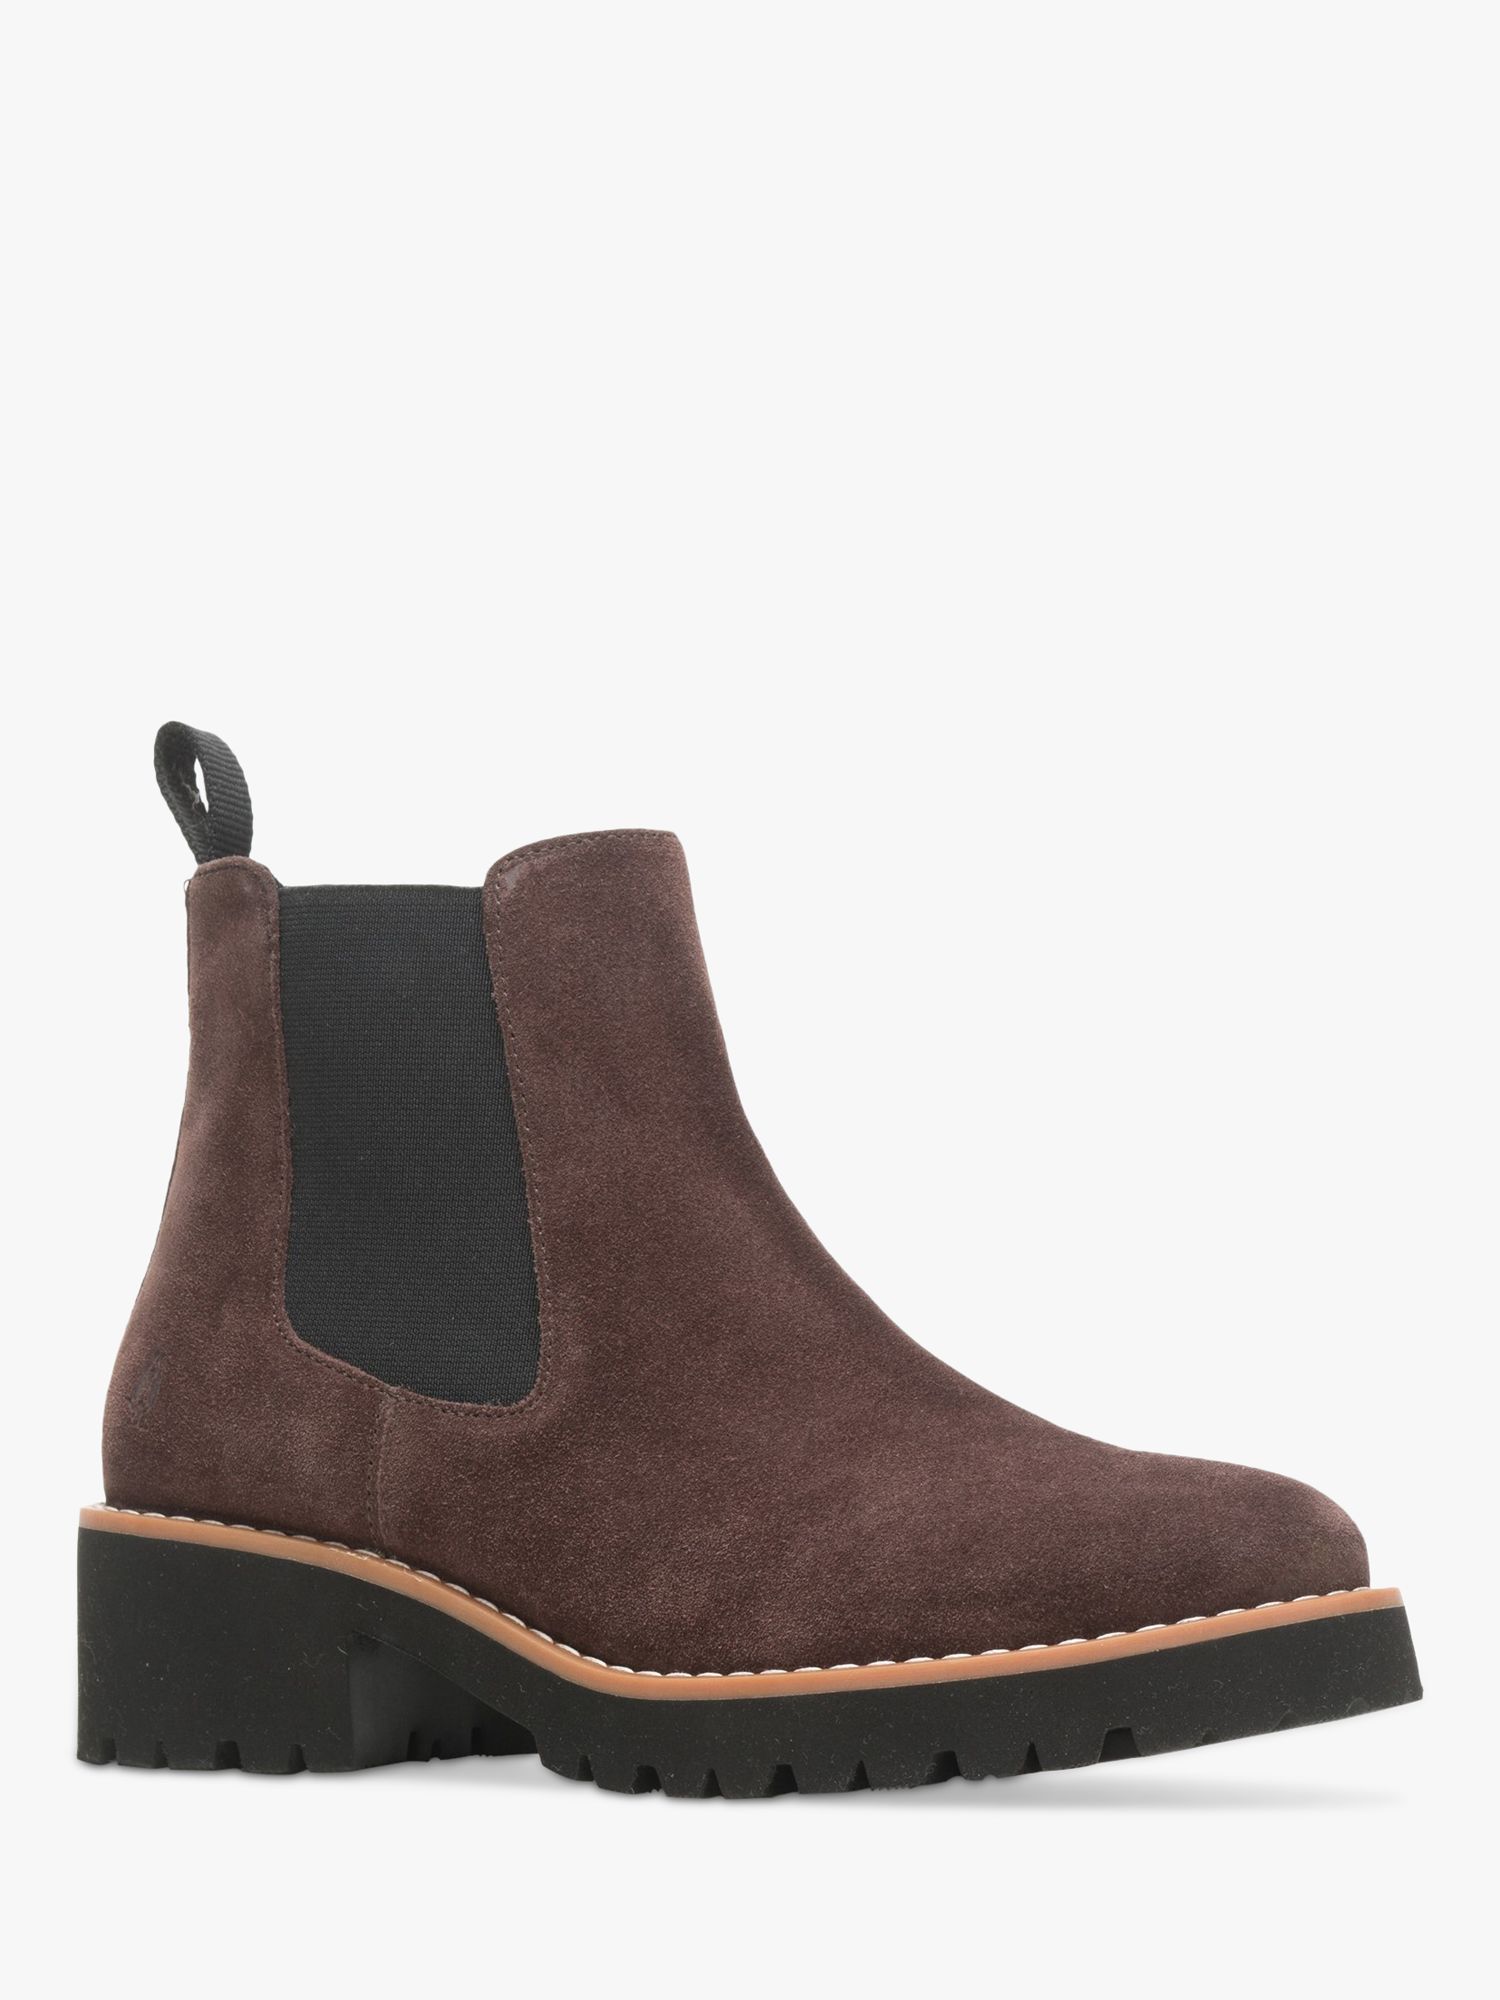 Hush Puppies Amelia Suede Chelsea Boots, Brown at John Lewis & Partners